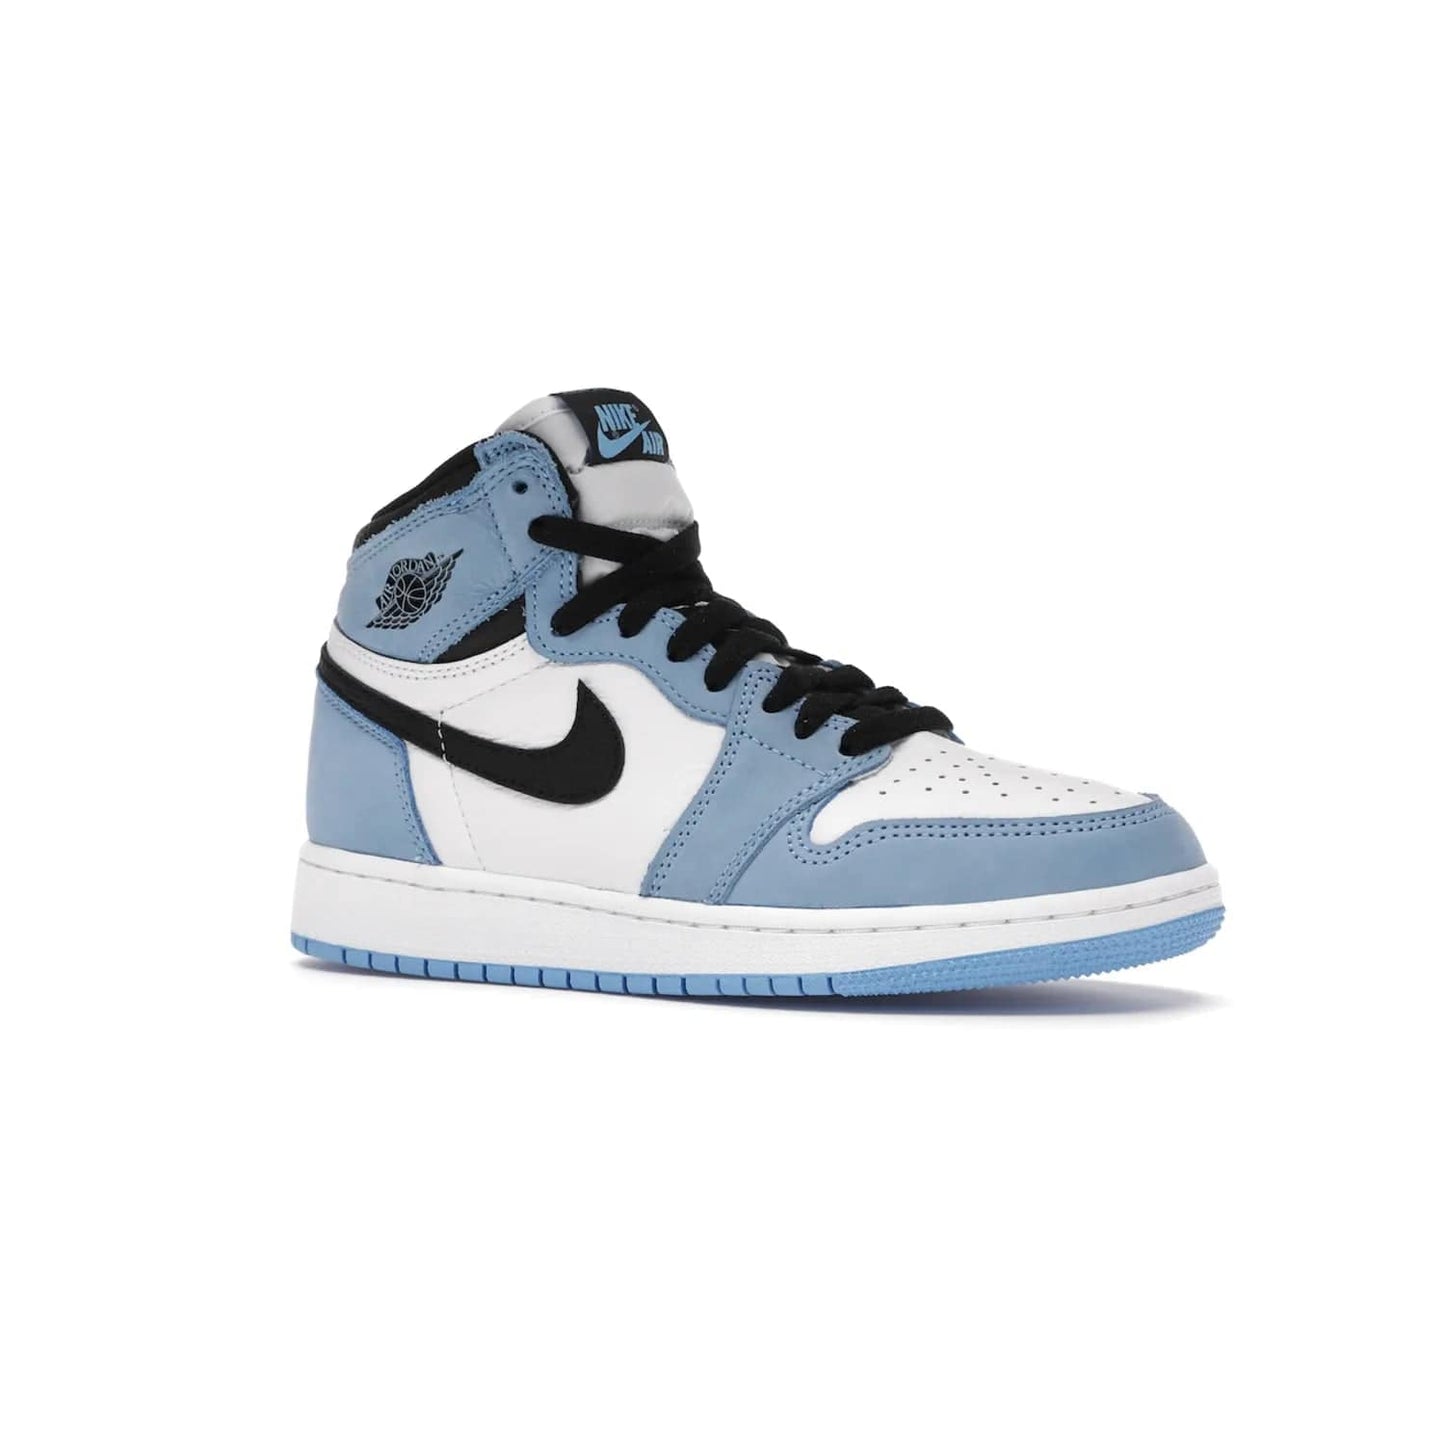 Jordan 1 Retro High White University Blue Black (GS) - Image 4 - Only at www.BallersClubKickz.com - Air Jordan 1 Retro High White University Blue Black GS: the latest offering from the iconic Air Jordan 1 line. White tumbled leather upper with University Blue overlays and black detailing. University Blue outsole and white midsole. March 6 release.